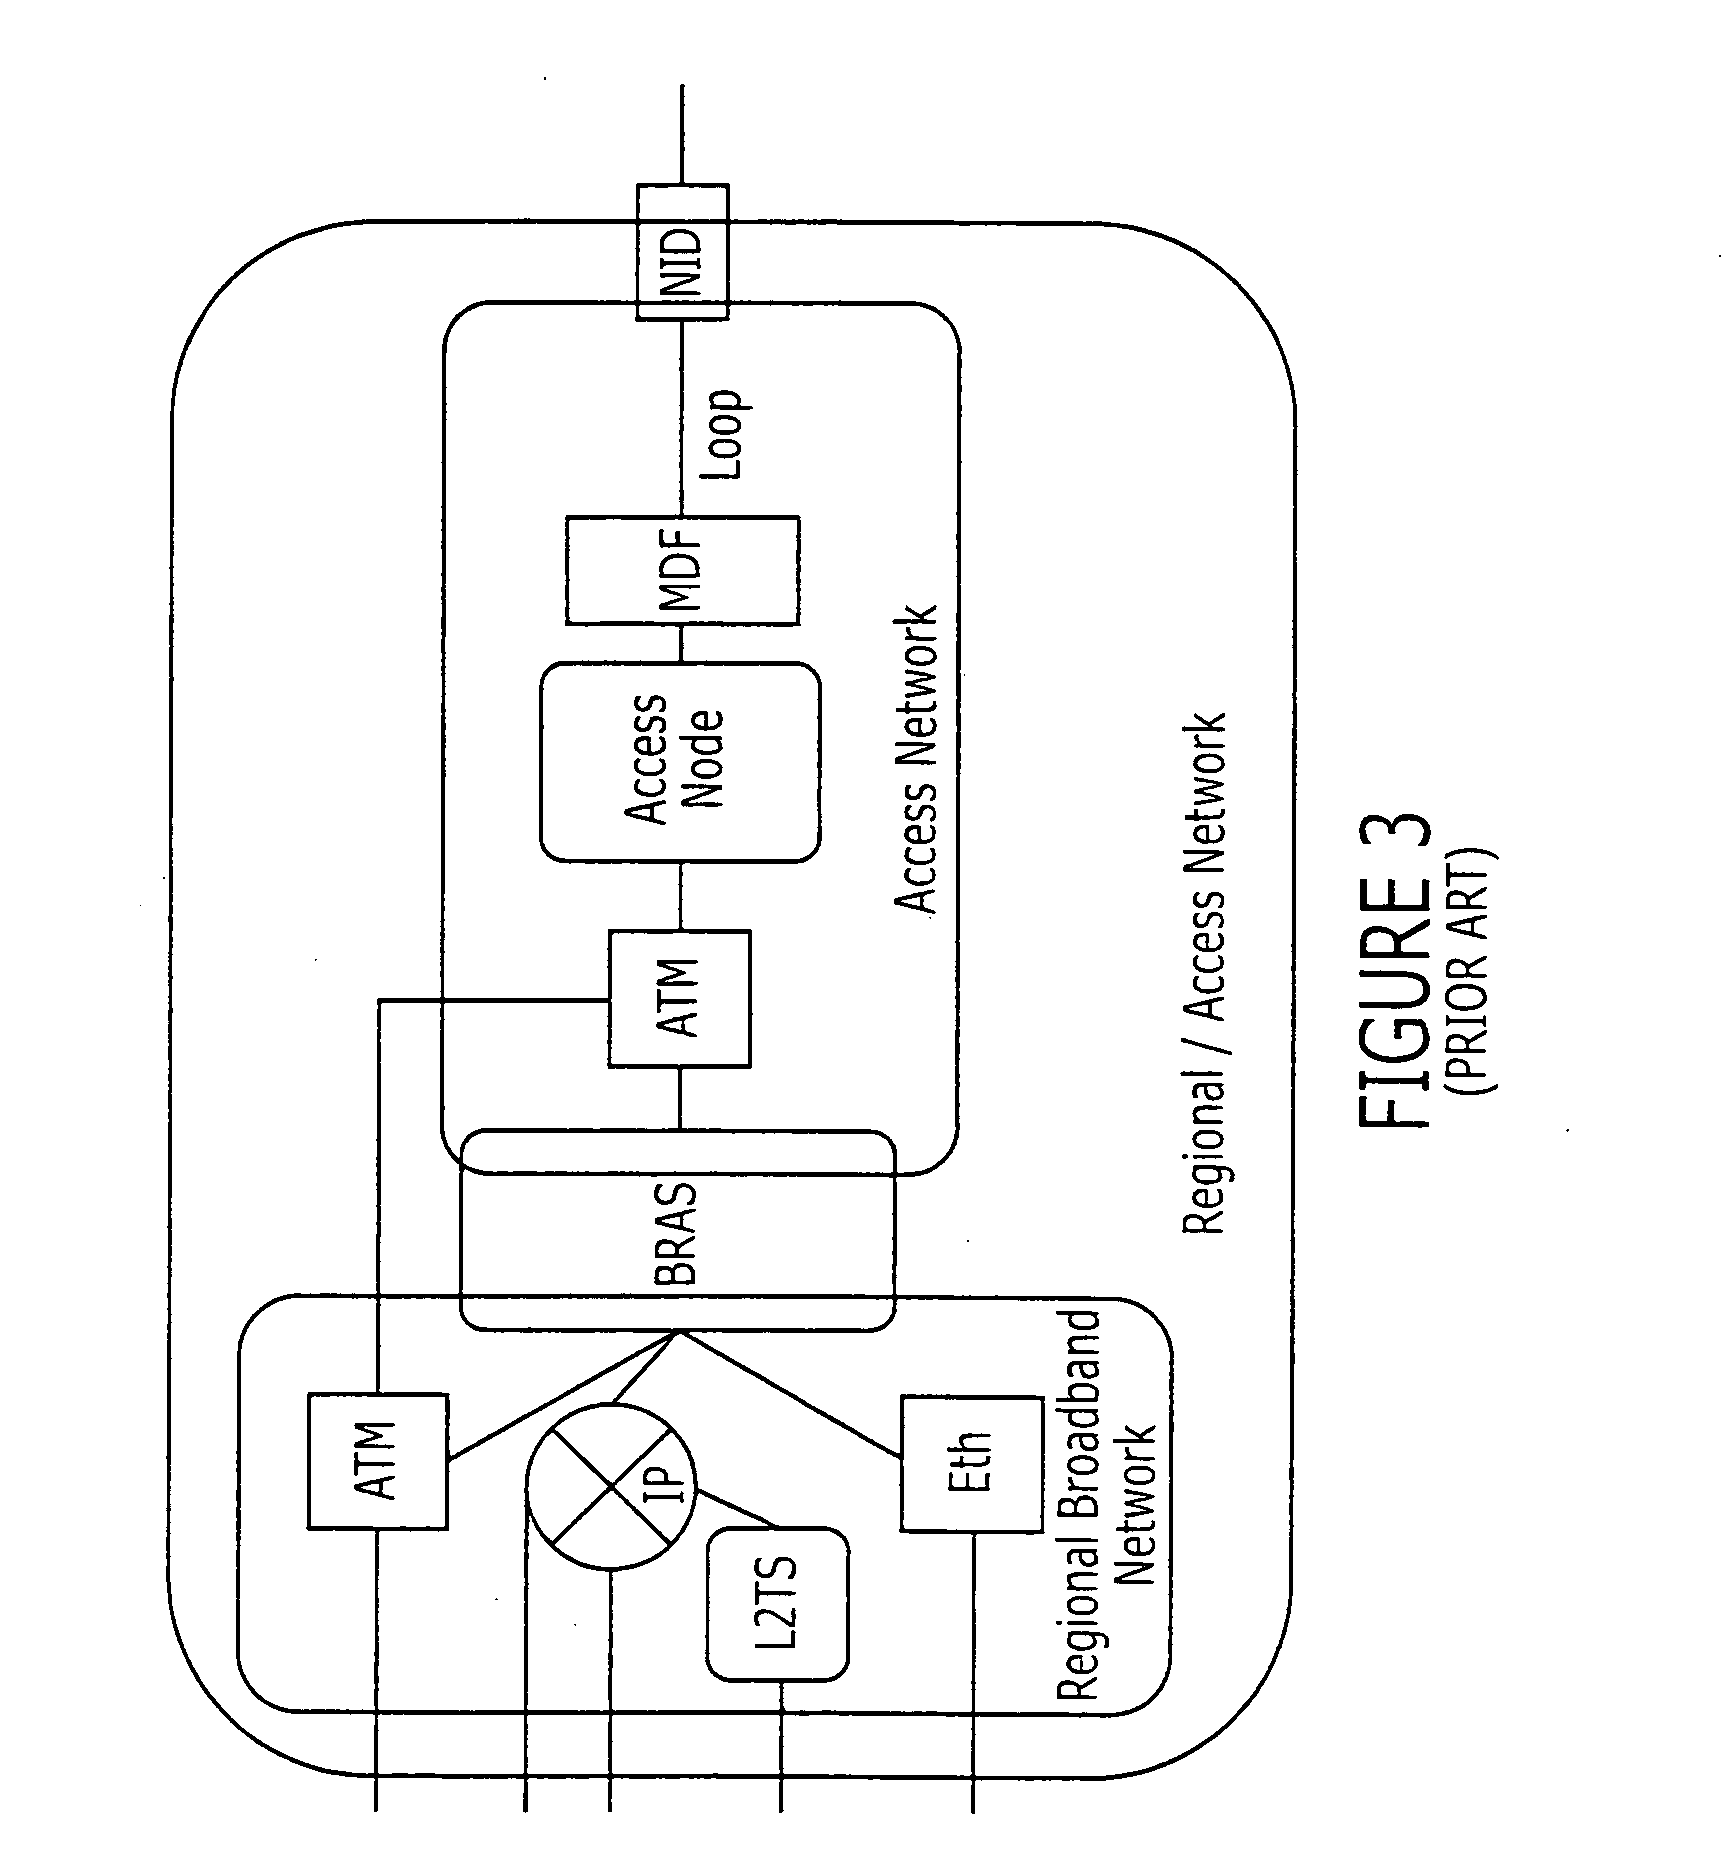 Data architectures for managing quality of service and/or bandwidth allocation in a regional/access network (RAN)